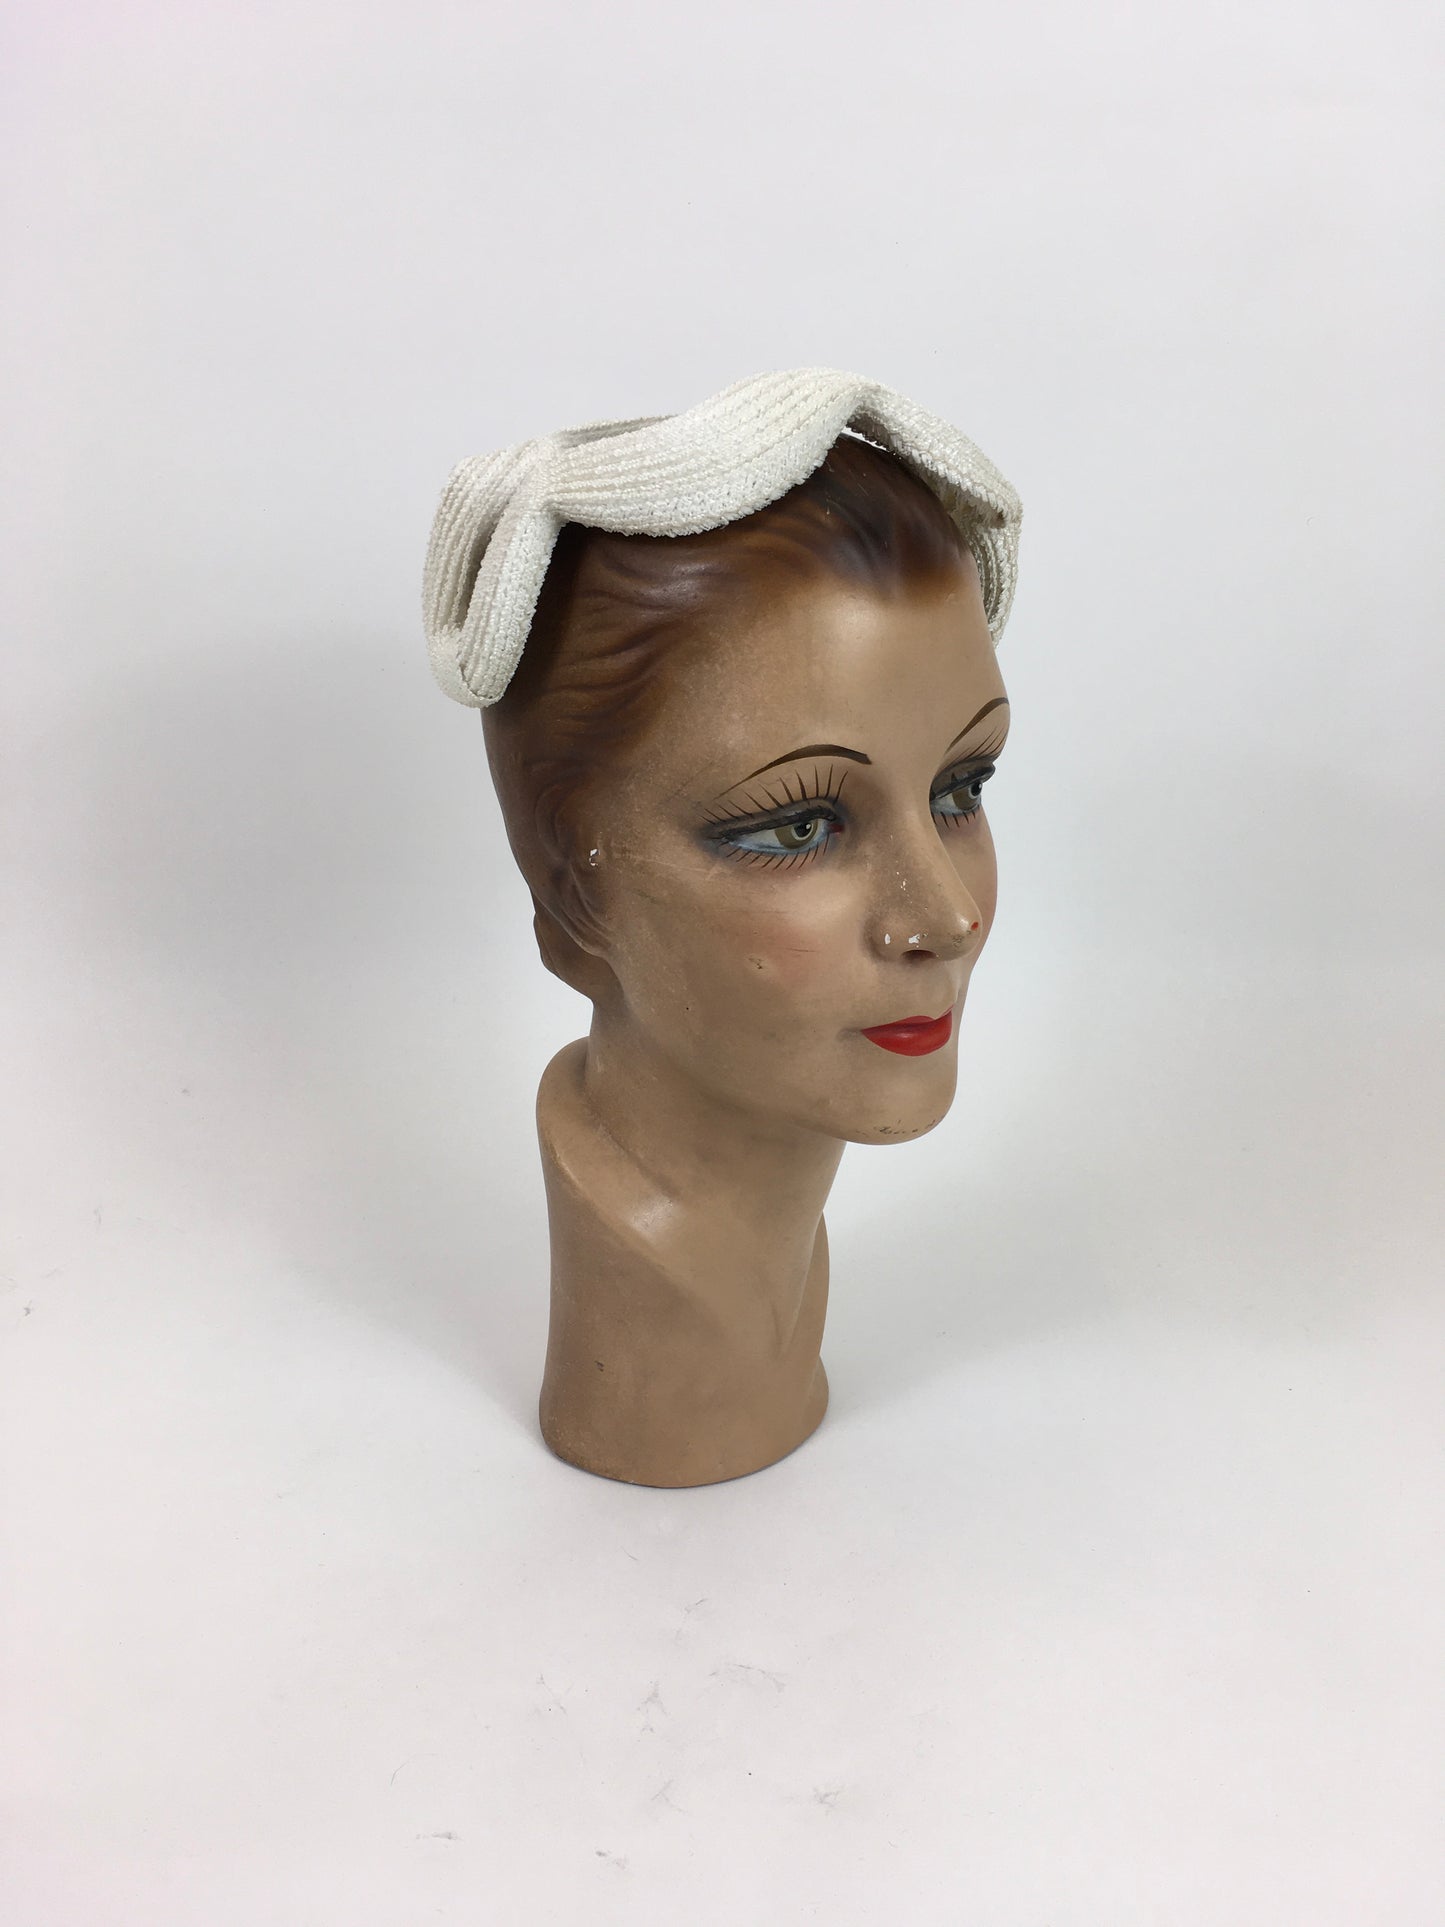 Original 1950’s Darling Ivory Headpiece - ‘ New Look’ Inspired with an Iconic Structure